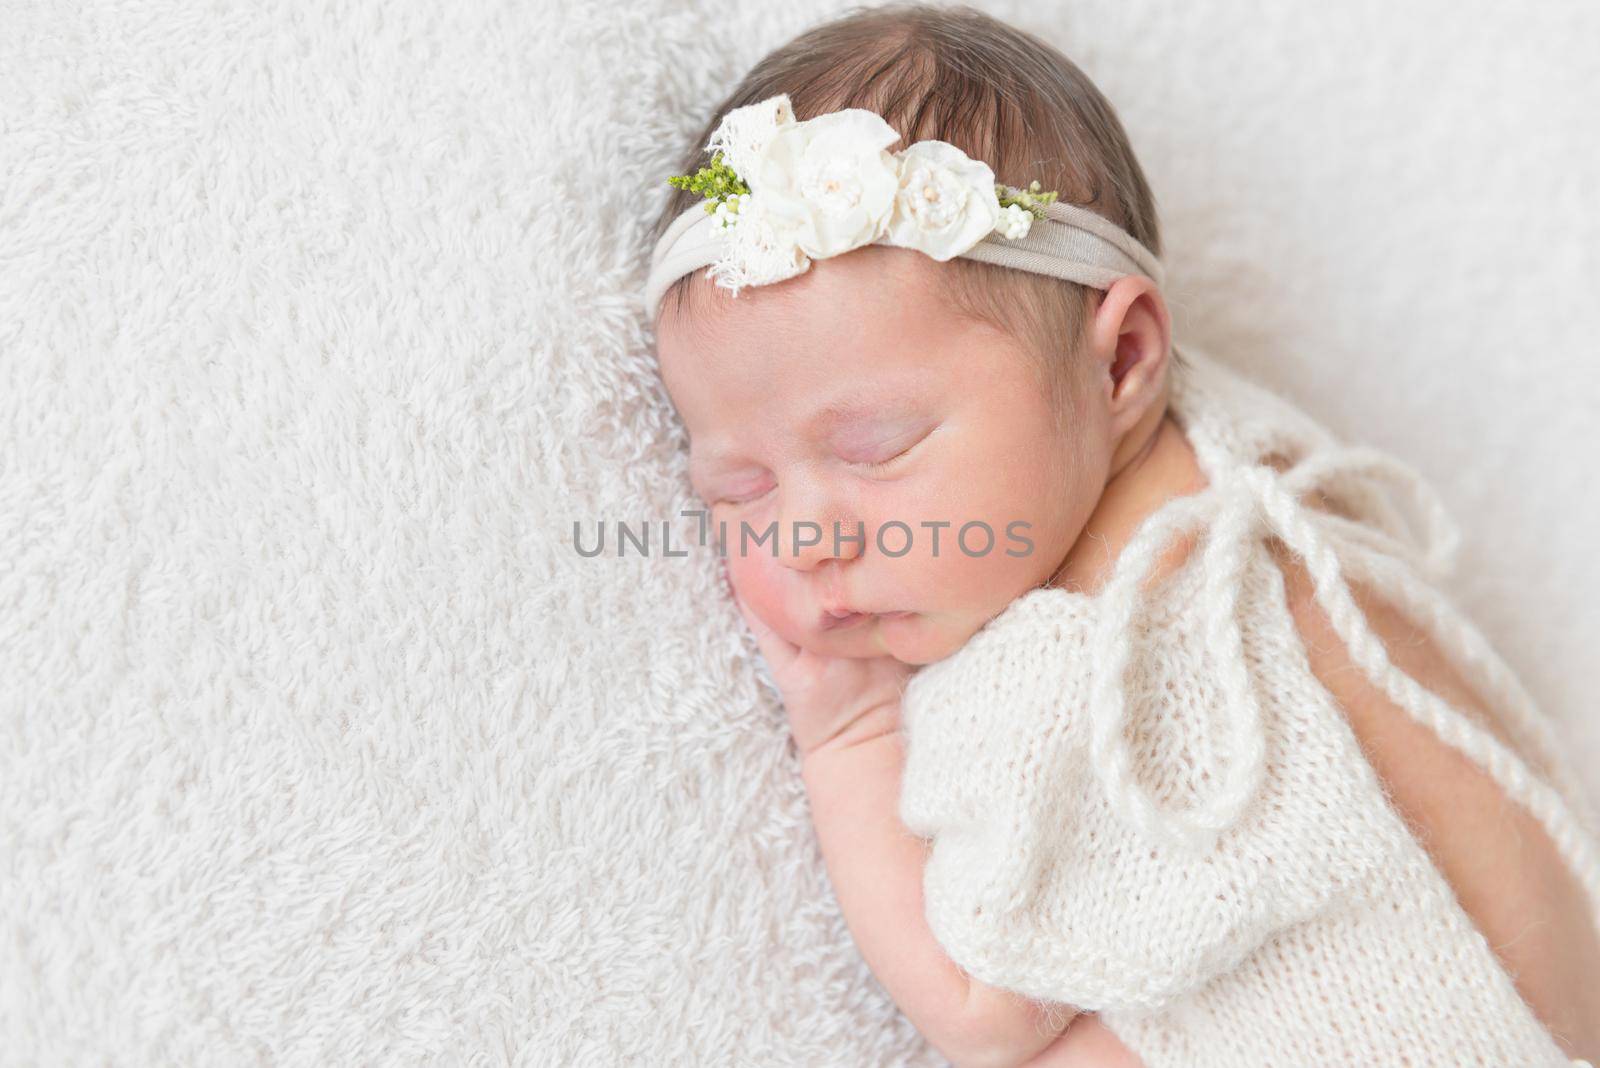 Lovely sleeping baby with a white hairband, dressed in white cute suit napping